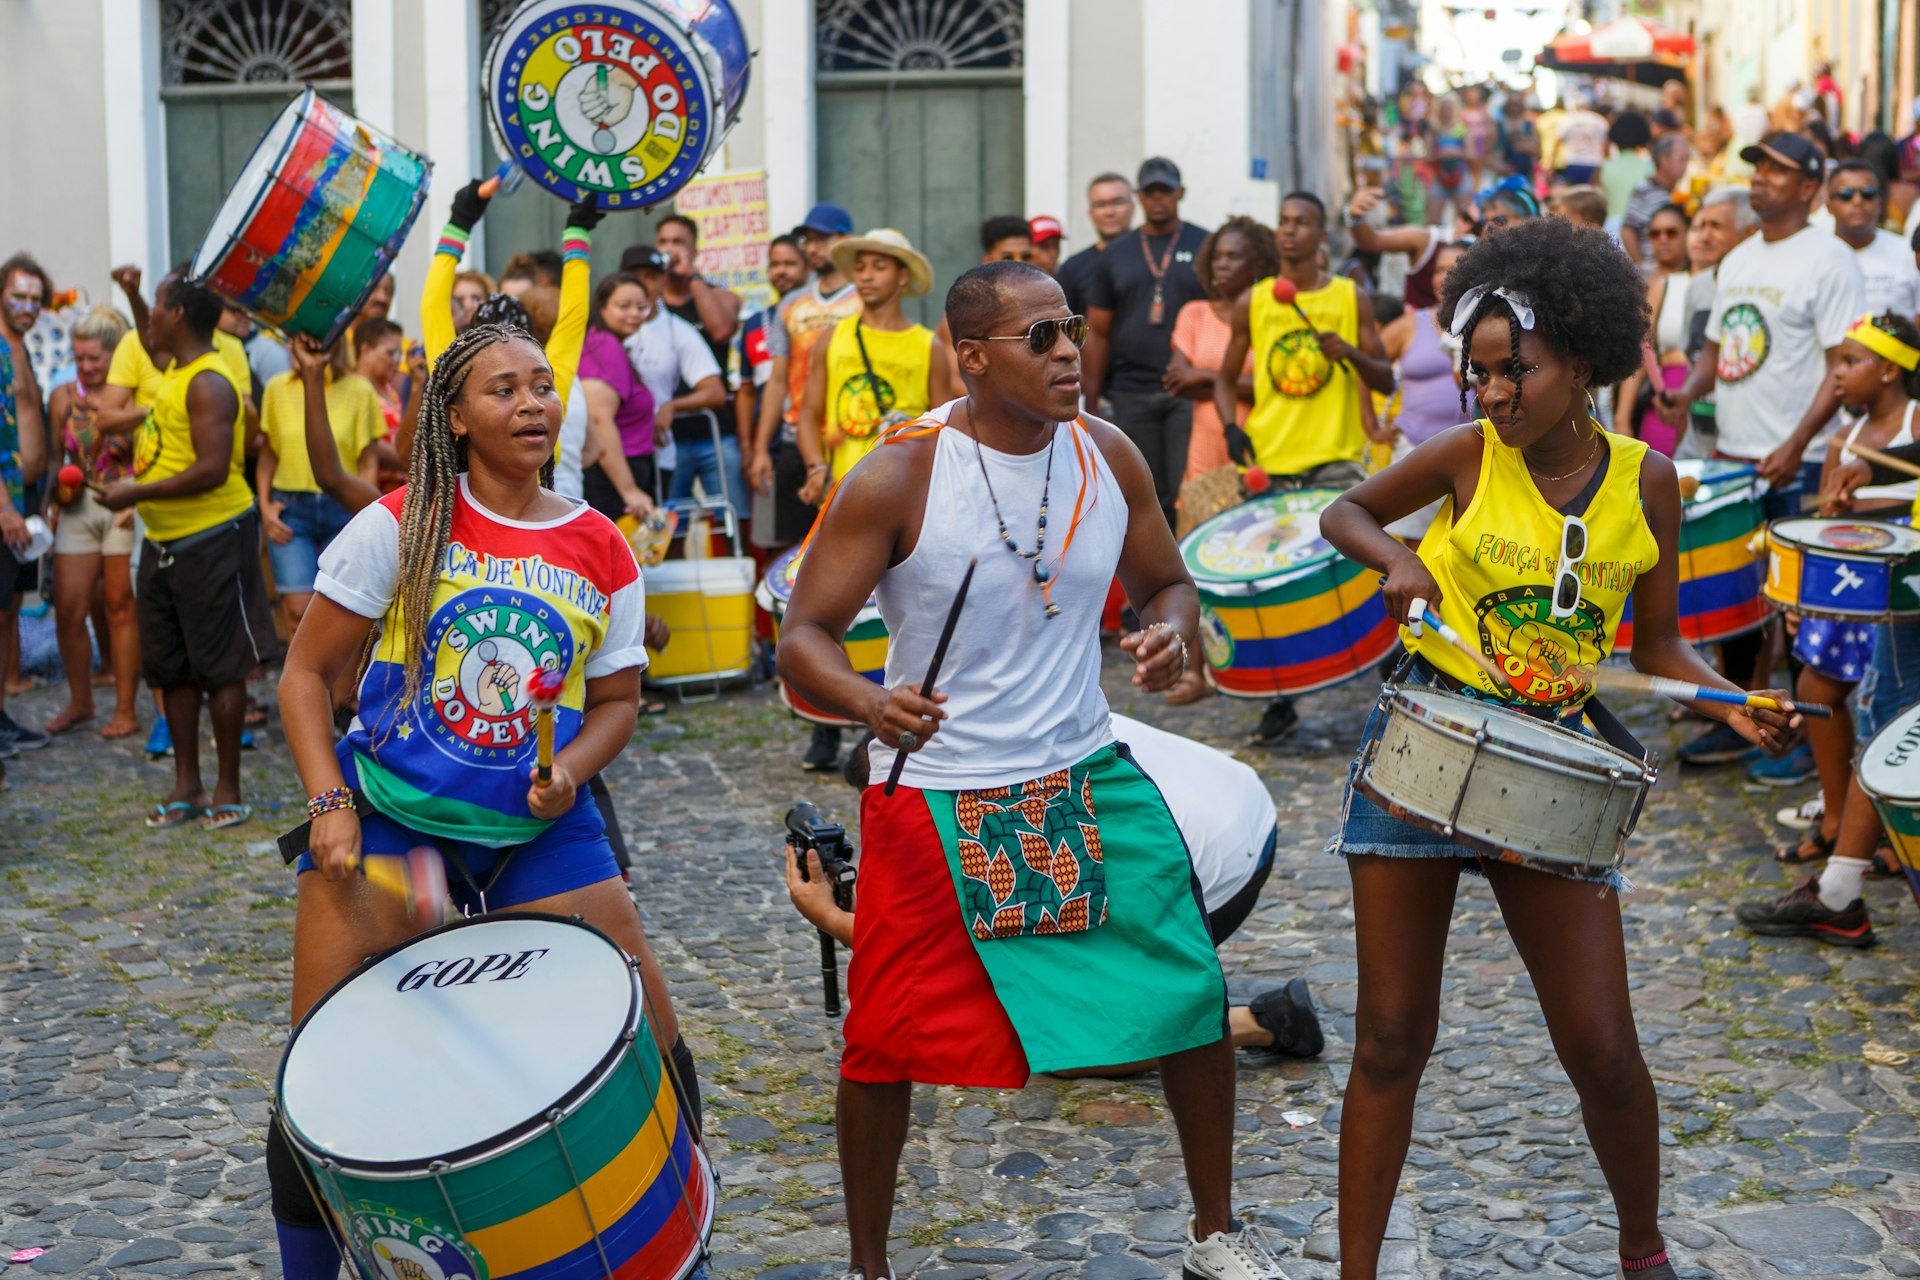 Three percussionists, two women and one man, playing drums in a street parade in Pelourinho in Salvador, Brazil with onlookers in the background in a historic area with cobblestone streets.